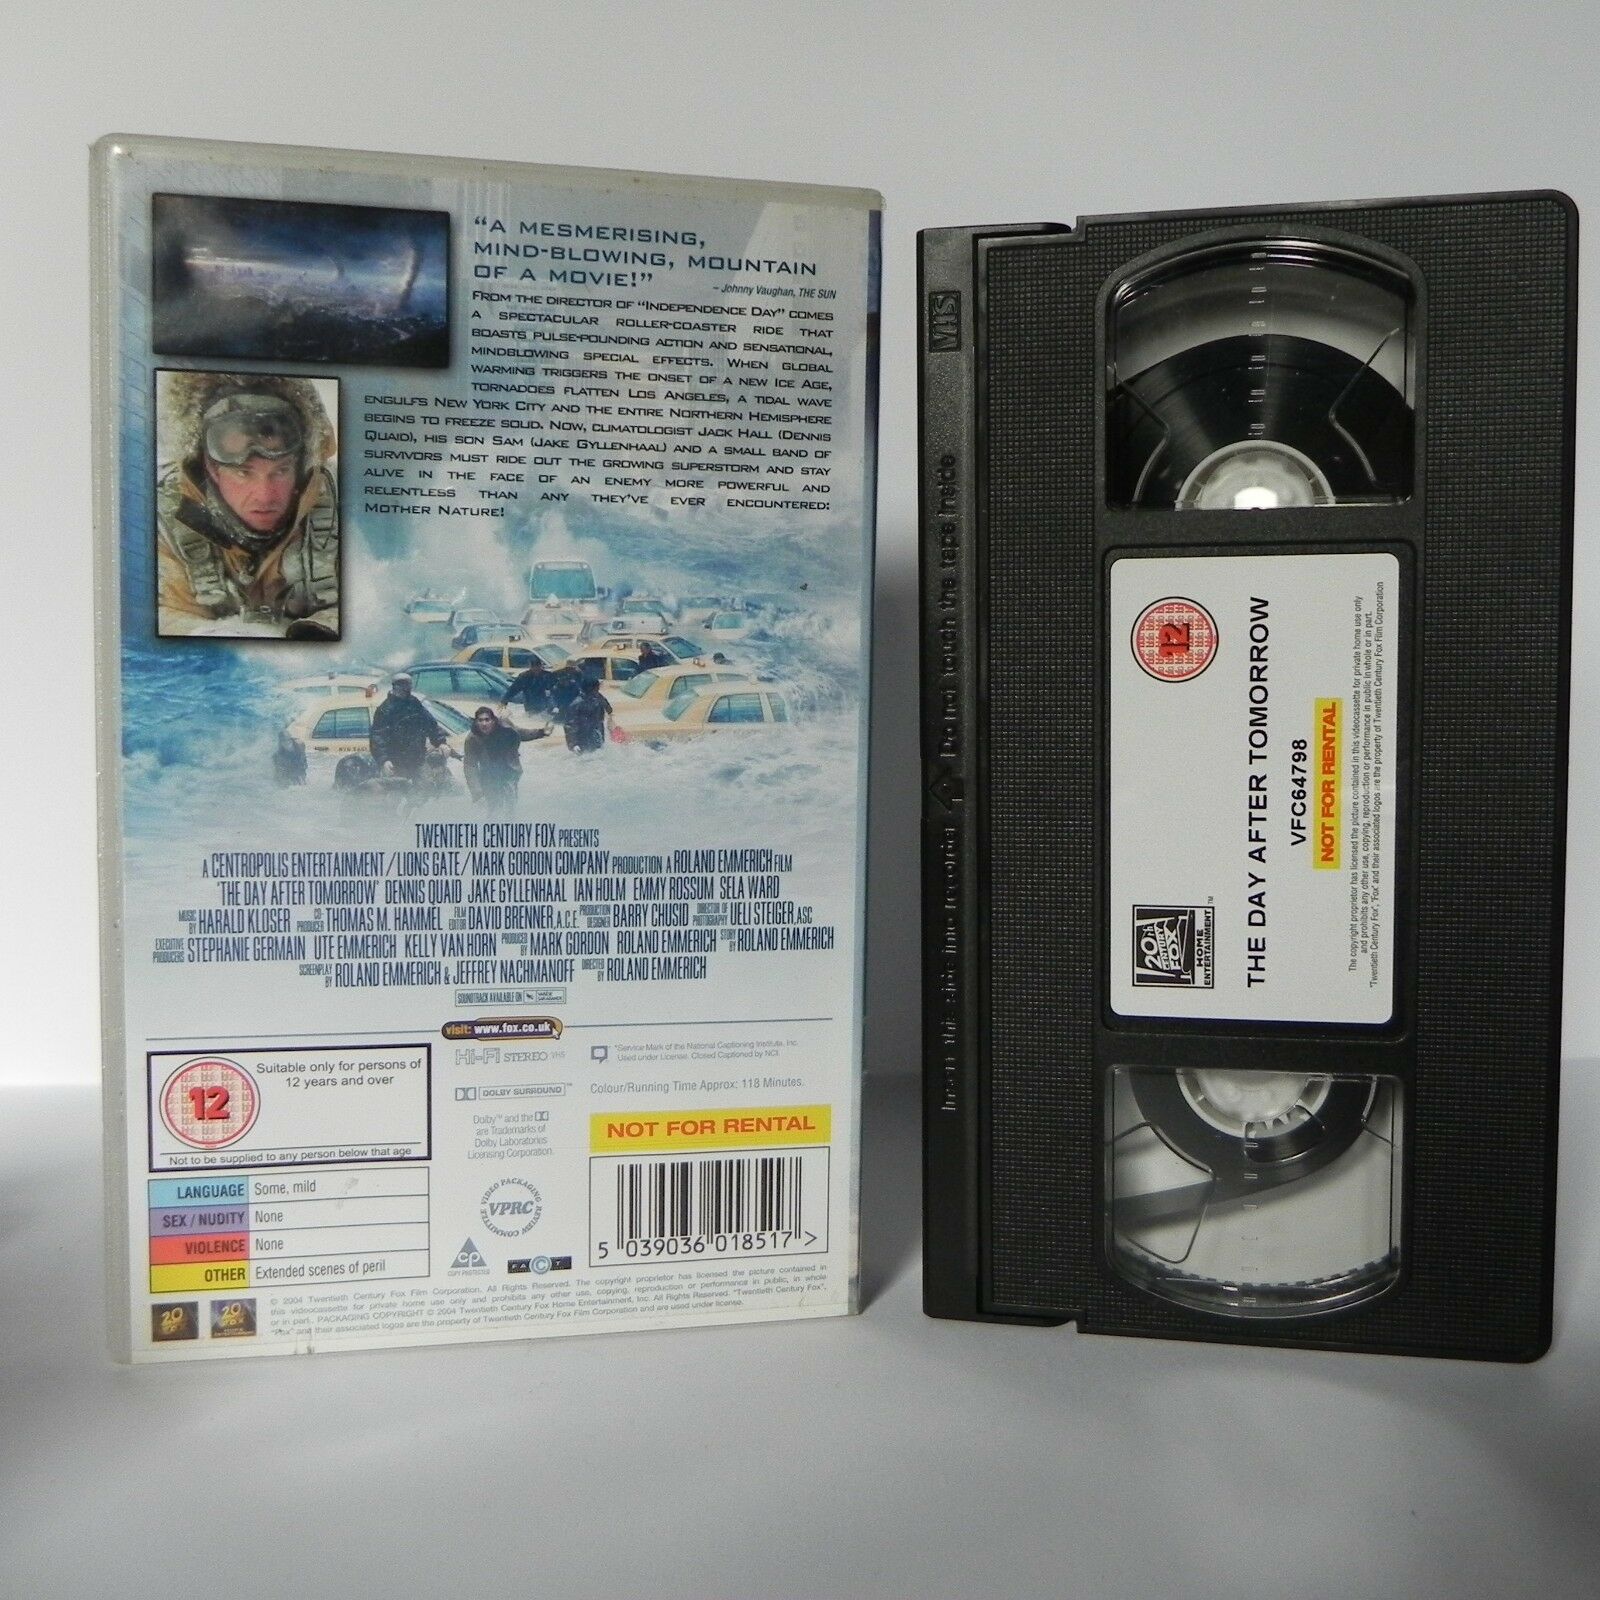 The Day After Tomorrow: Instant [Ice-Age] Apocalypse - Dennis Quaid Scifi - VHS-